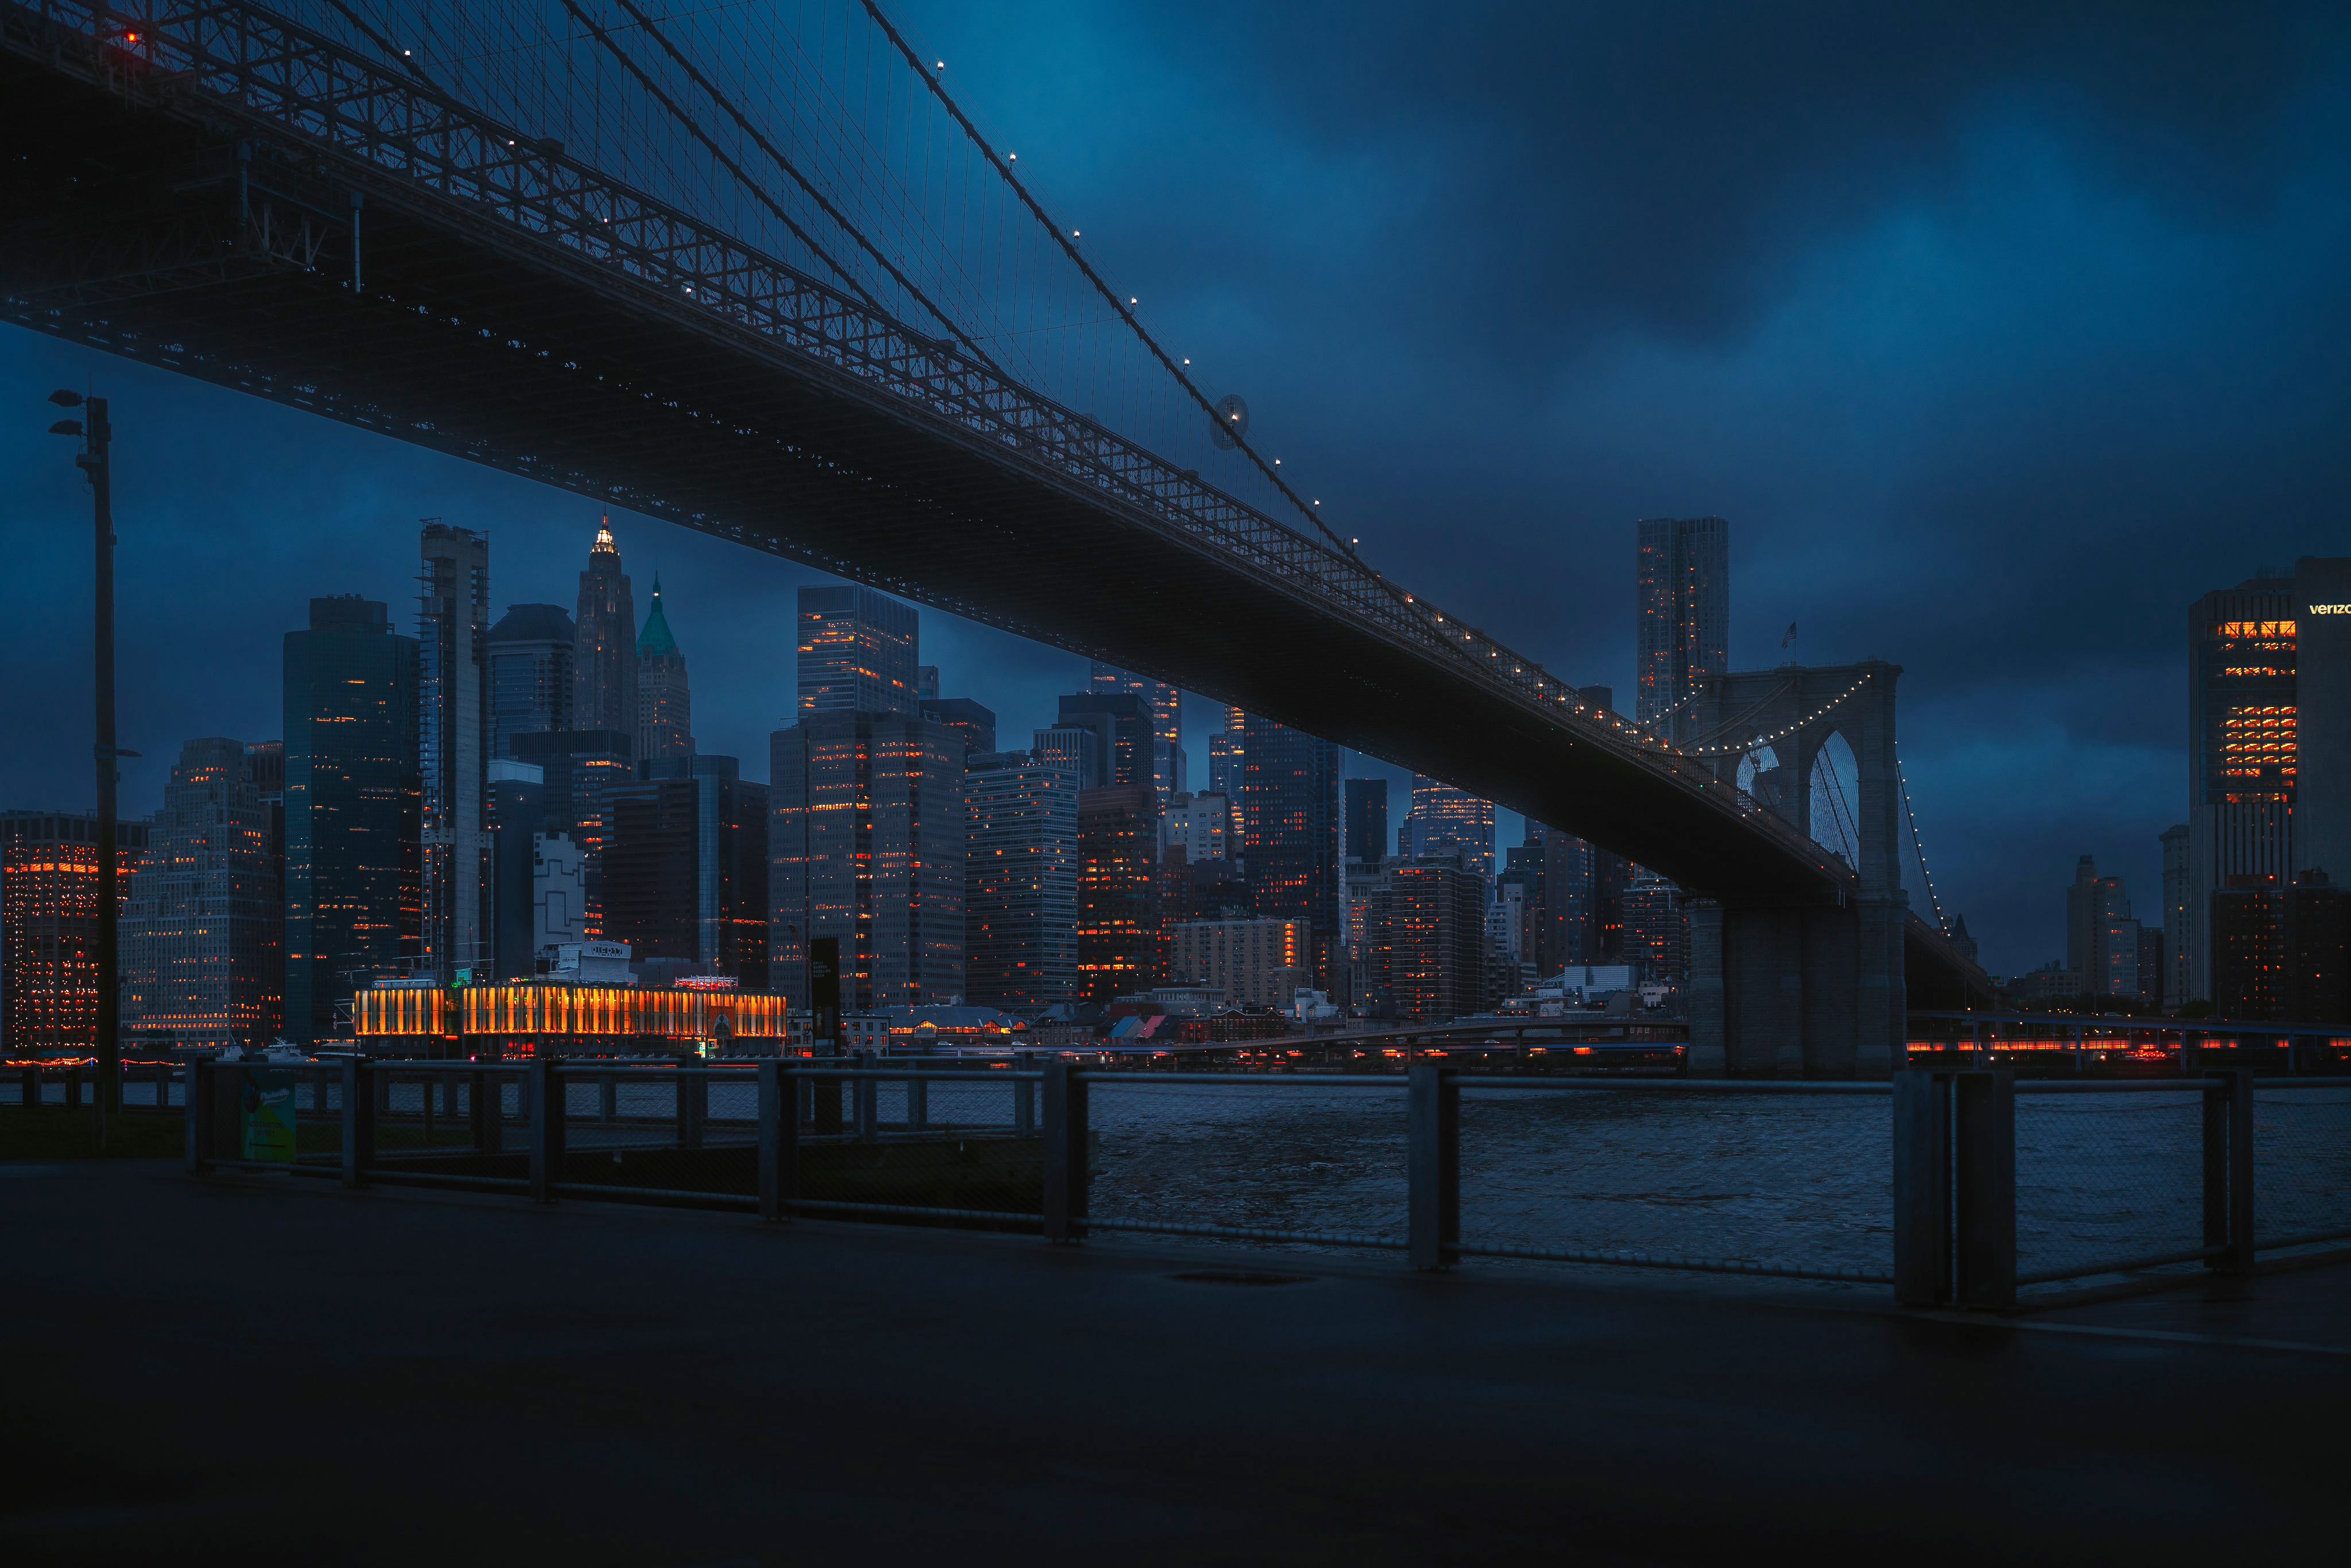 A city skyline with a suspension bridge at night - New York